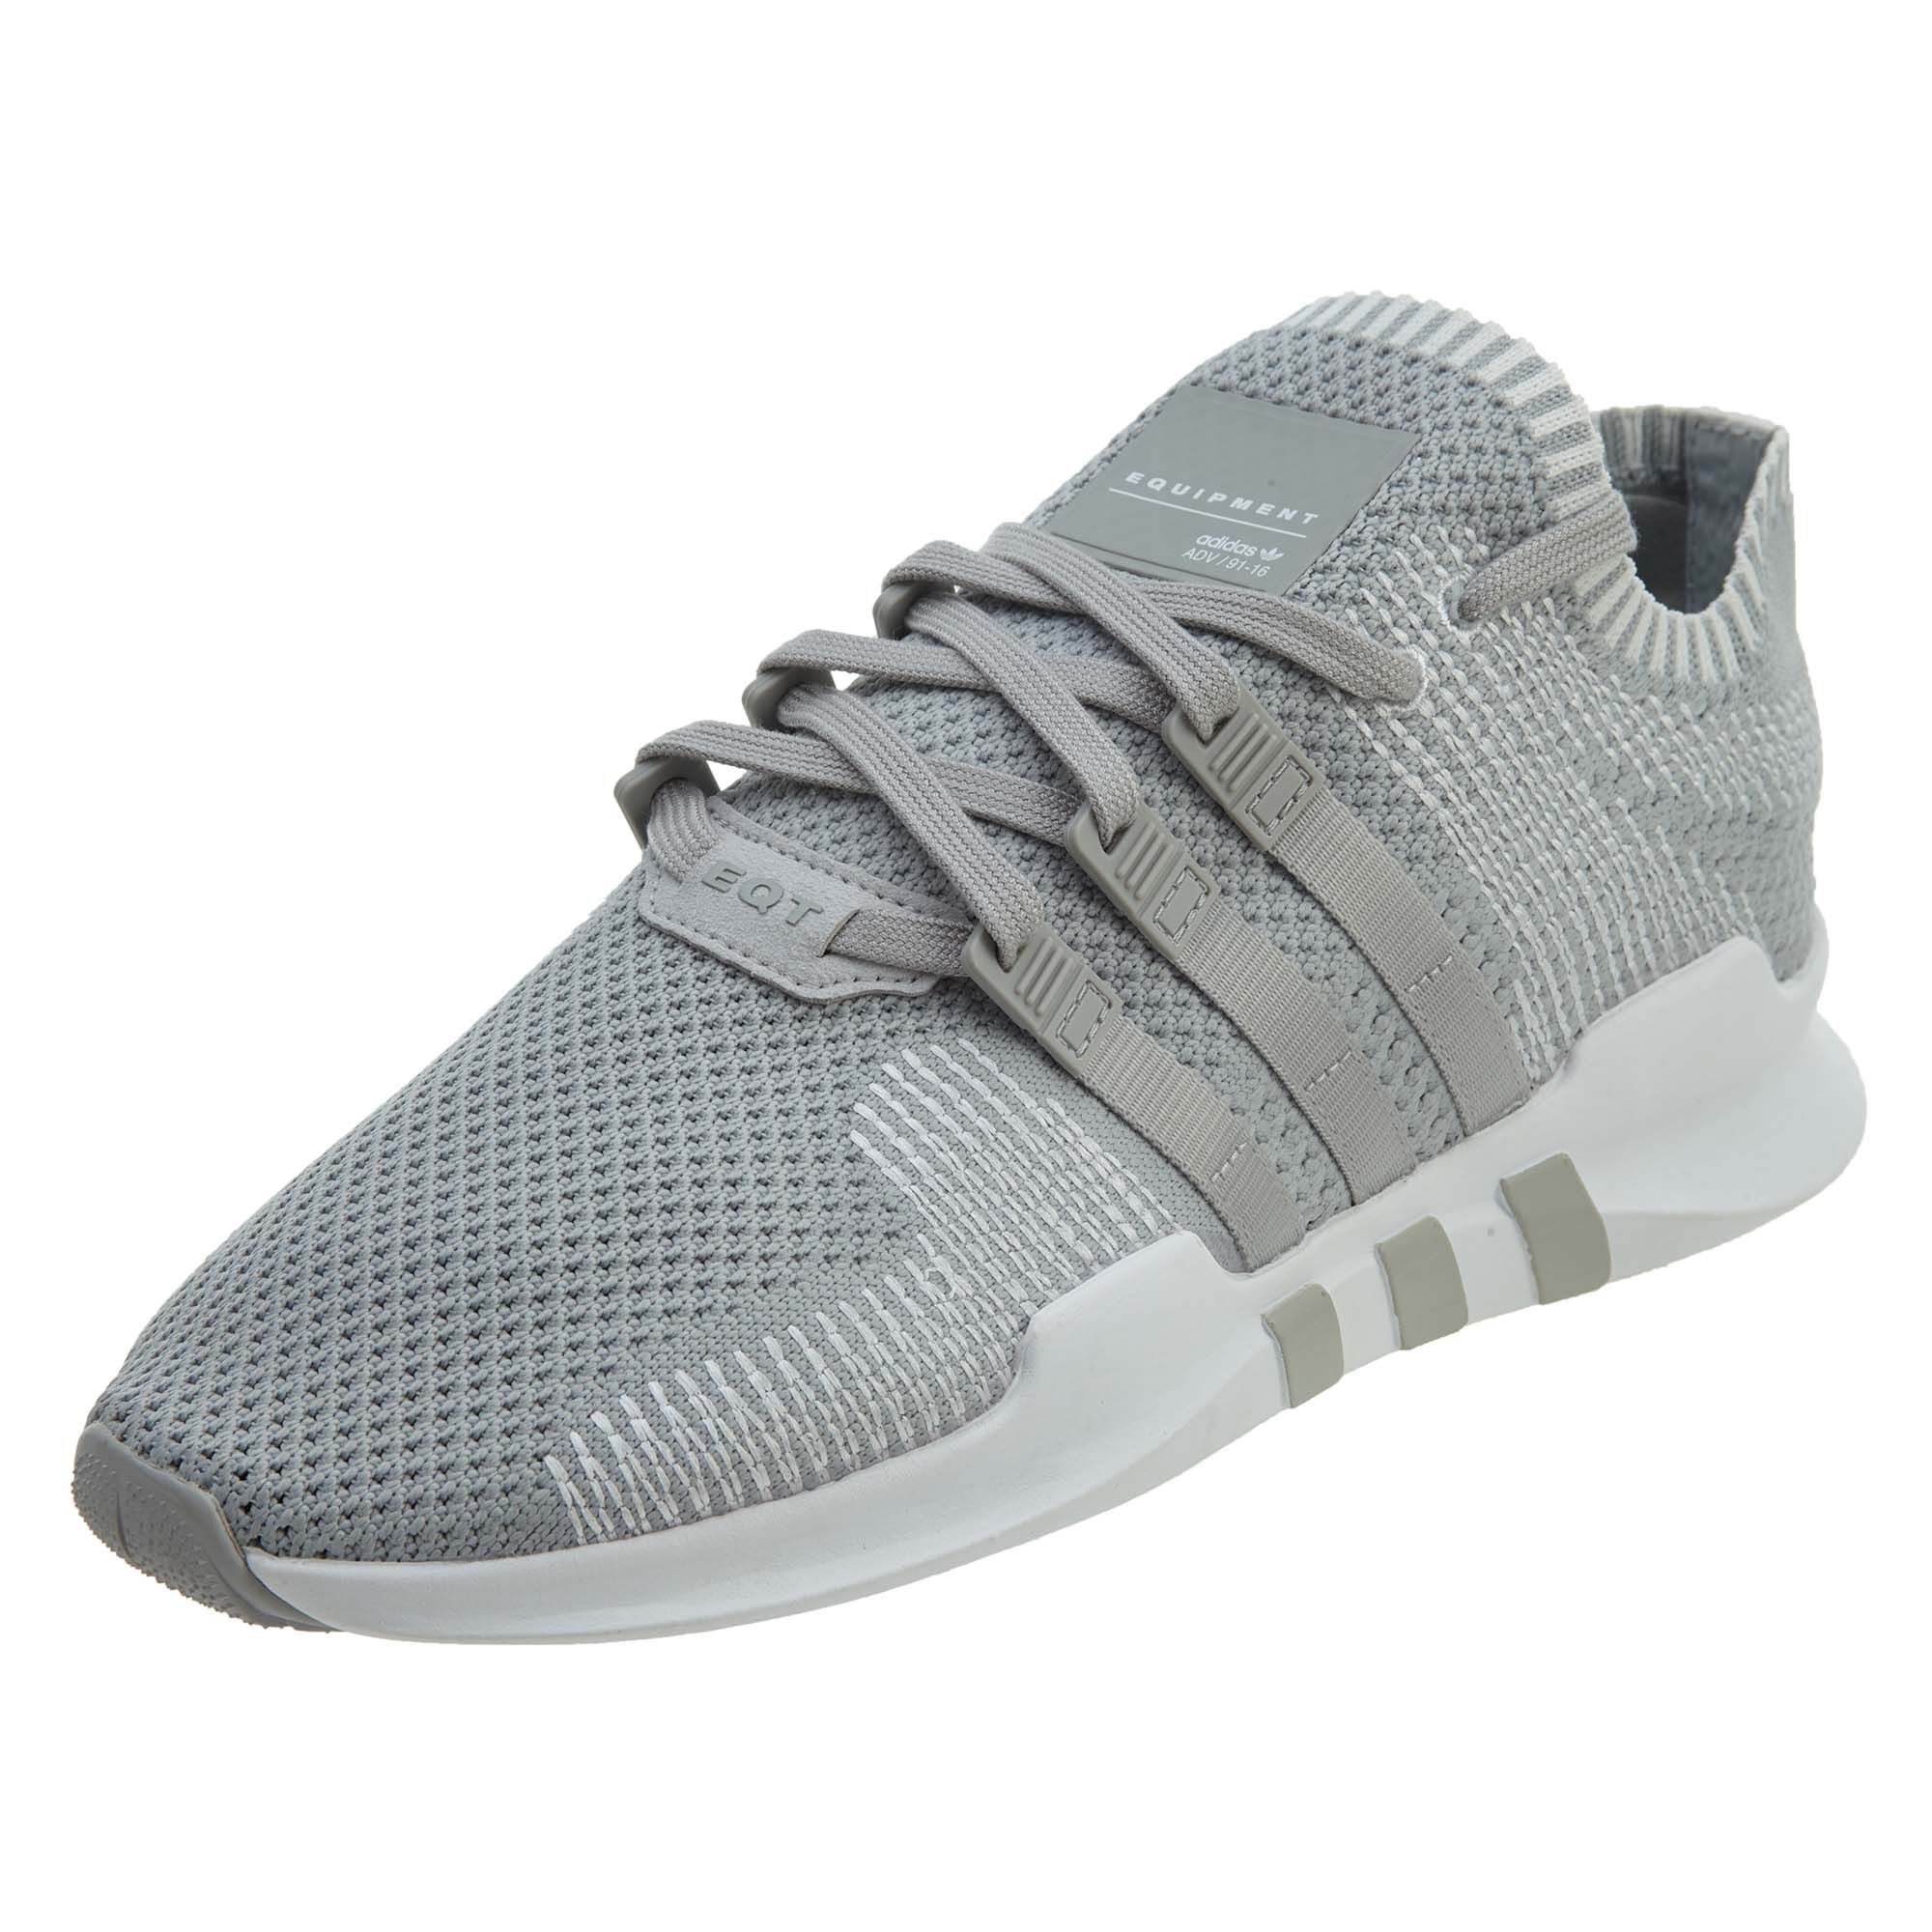 Adidas Eqt Support Adv Pk Mens Style 